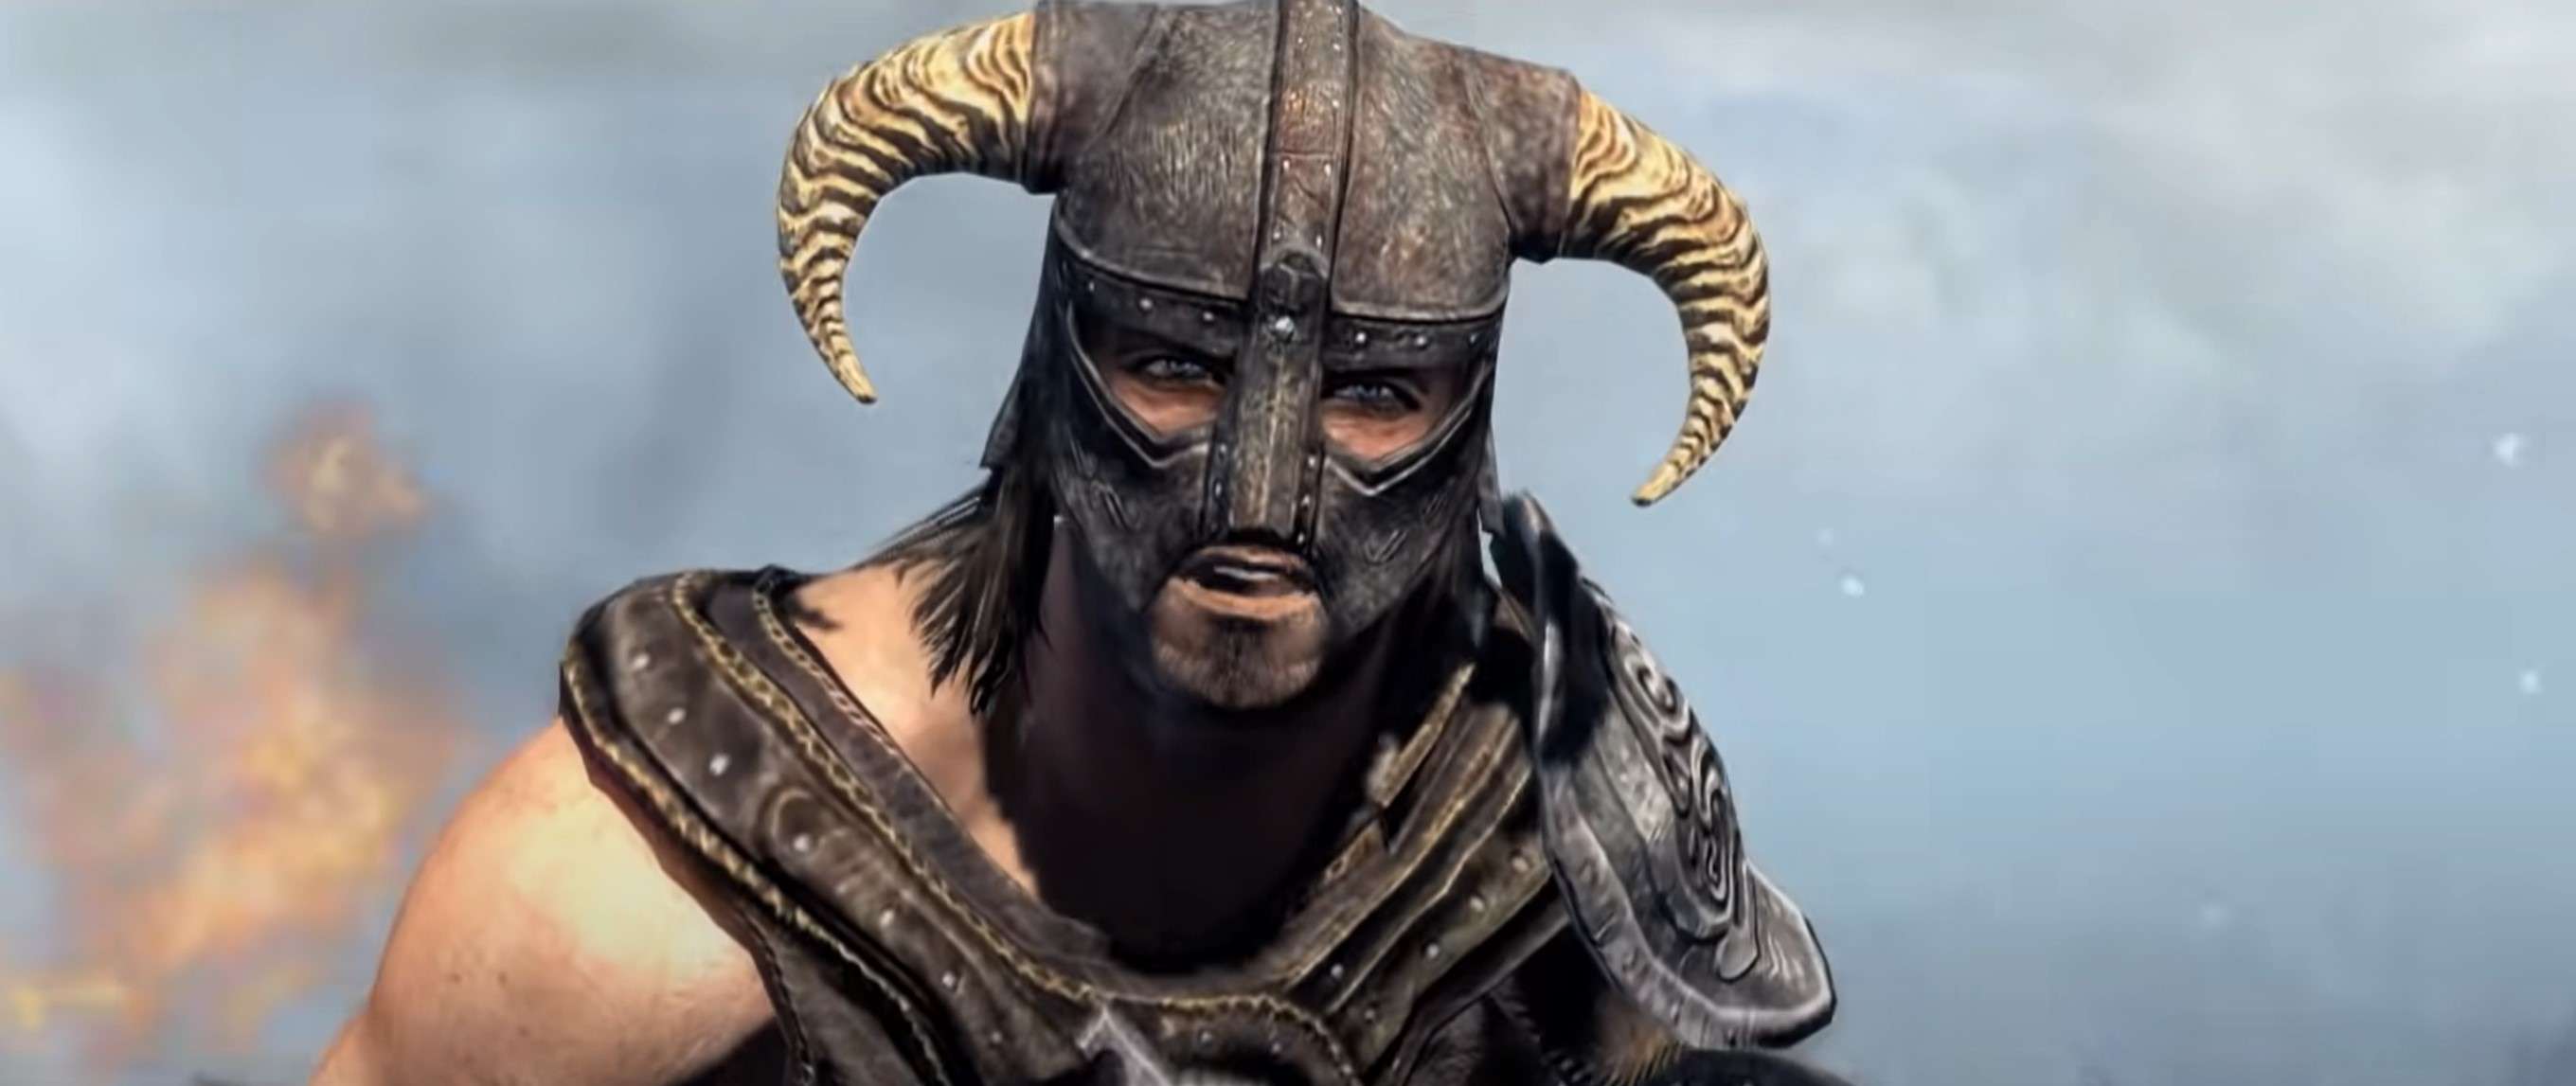 how to get skyrim dlc for free on ps3 2016